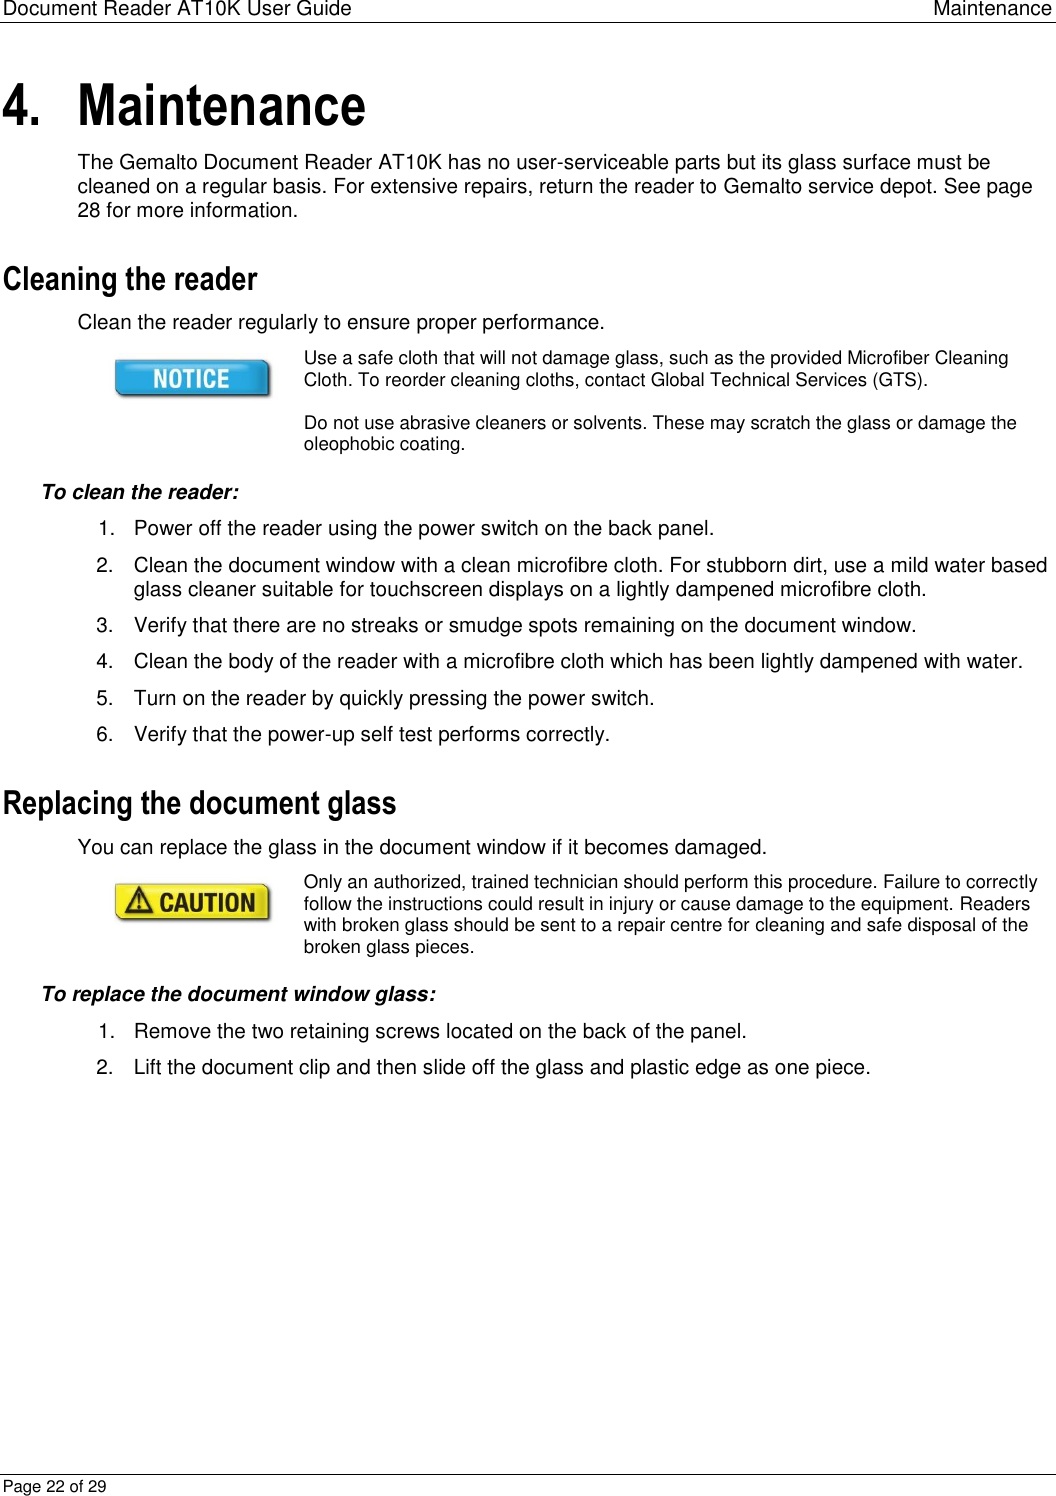 Document Reader AT10K User Guide Maintenance Page 22 of 29 4. Maintenance The Gemalto Document Reader AT10K has no user-serviceable parts but its glass surface must be cleaned on a regular basis. For extensive repairs, return the reader to Gemalto service depot. See page 28 for more information. Cleaning the reader Clean the reader regularly to ensure proper performance.  Use a safe cloth that will not damage glass, such as the provided Microfiber Cleaning Cloth. To reorder cleaning cloths, contact Global Technical Services (GTS).   Do not use abrasive cleaners or solvents. These may scratch the glass or damage the oleophobic coating. To clean the reader: 1.  Power off the reader using the power switch on the back panel. 2.  Clean the document window with a clean microfibre cloth. For stubborn dirt, use a mild water based glass cleaner suitable for touchscreen displays on a lightly dampened microfibre cloth.  3.  Verify that there are no streaks or smudge spots remaining on the document window. 4.  Clean the body of the reader with a microfibre cloth which has been lightly dampened with water. 5.  Turn on the reader by quickly pressing the power switch. 6.  Verify that the power-up self test performs correctly. Replacing the document glass You can replace the glass in the document window if it becomes damaged.   Only an authorized, trained technician should perform this procedure. Failure to correctly follow the instructions could result in injury or cause damage to the equipment. Readers with broken glass should be sent to a repair centre for cleaning and safe disposal of the broken glass pieces. To replace the document window glass: 1.  Remove the two retaining screws located on the back of the panel. 2.  Lift the document clip and then slide off the glass and plastic edge as one piece.  